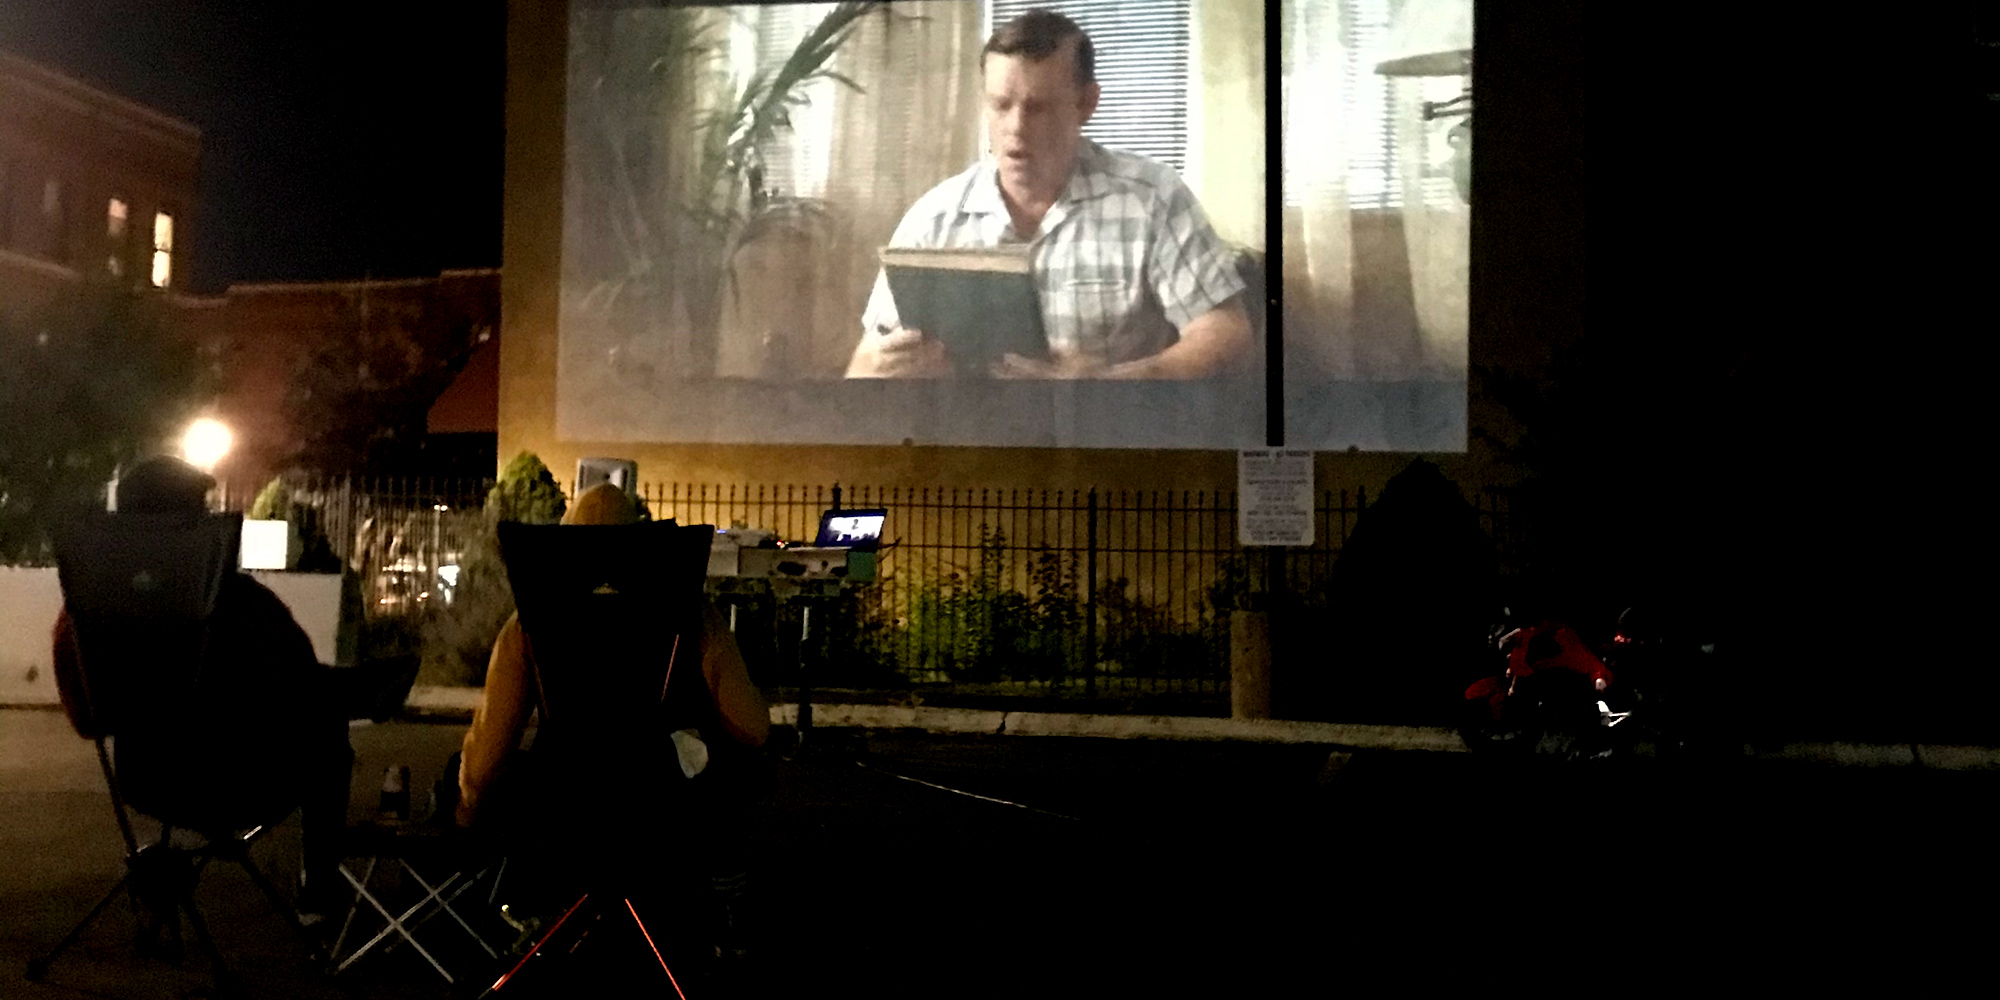 Movie Night at the NIC in Downtown Dutchtown.